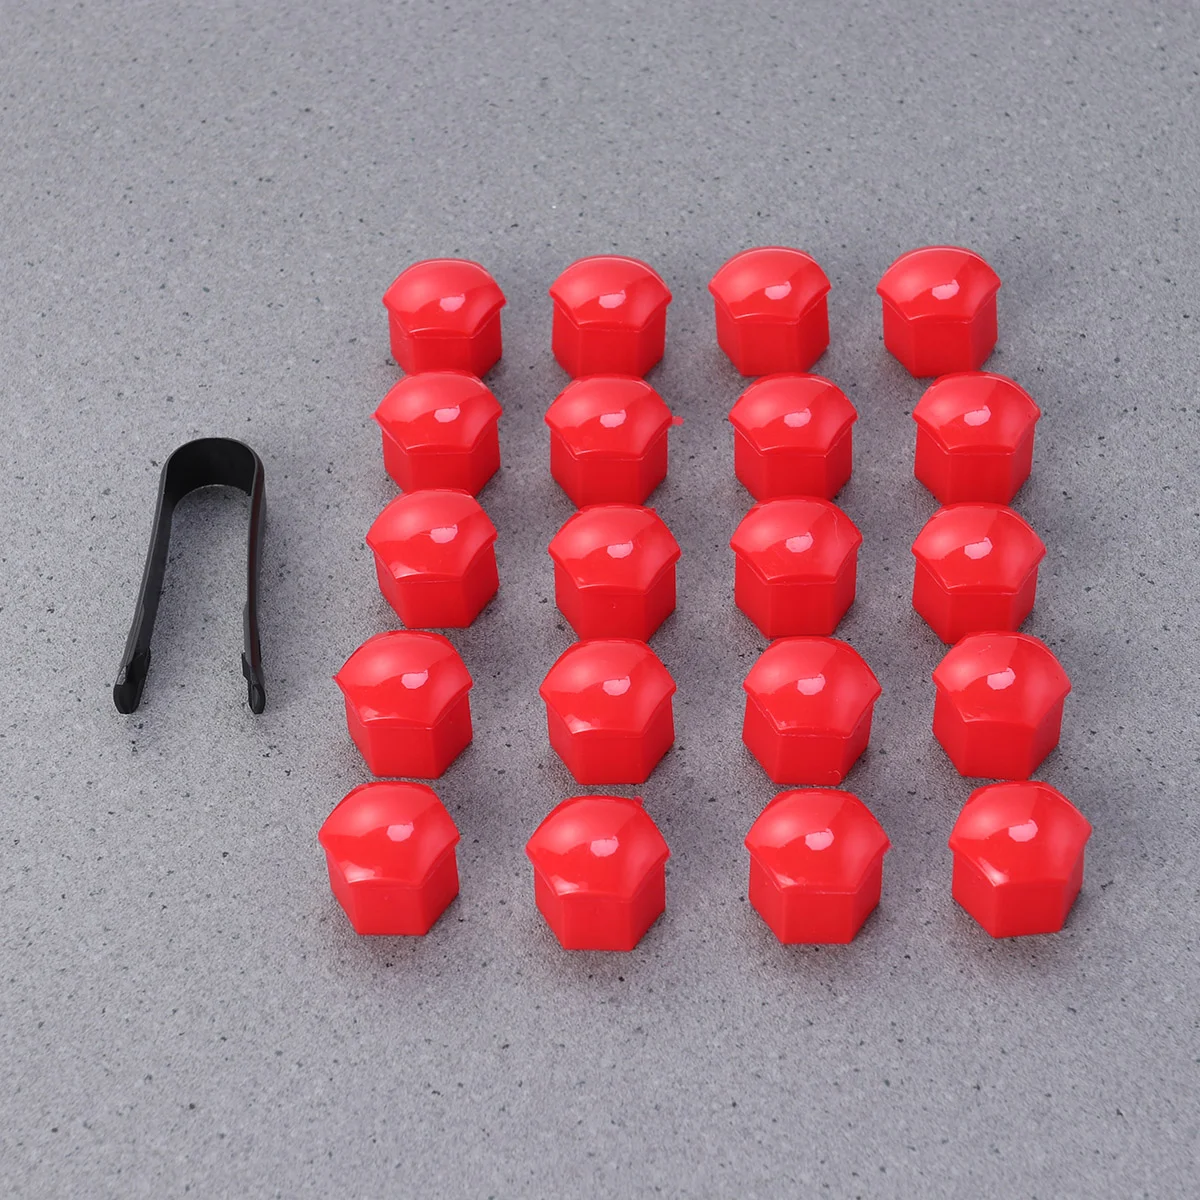 

21 in 1 Hexagonal Wheel Lug Nut Covers Bolts Covers Screw Protect Caps 21mm with Clips (Red)